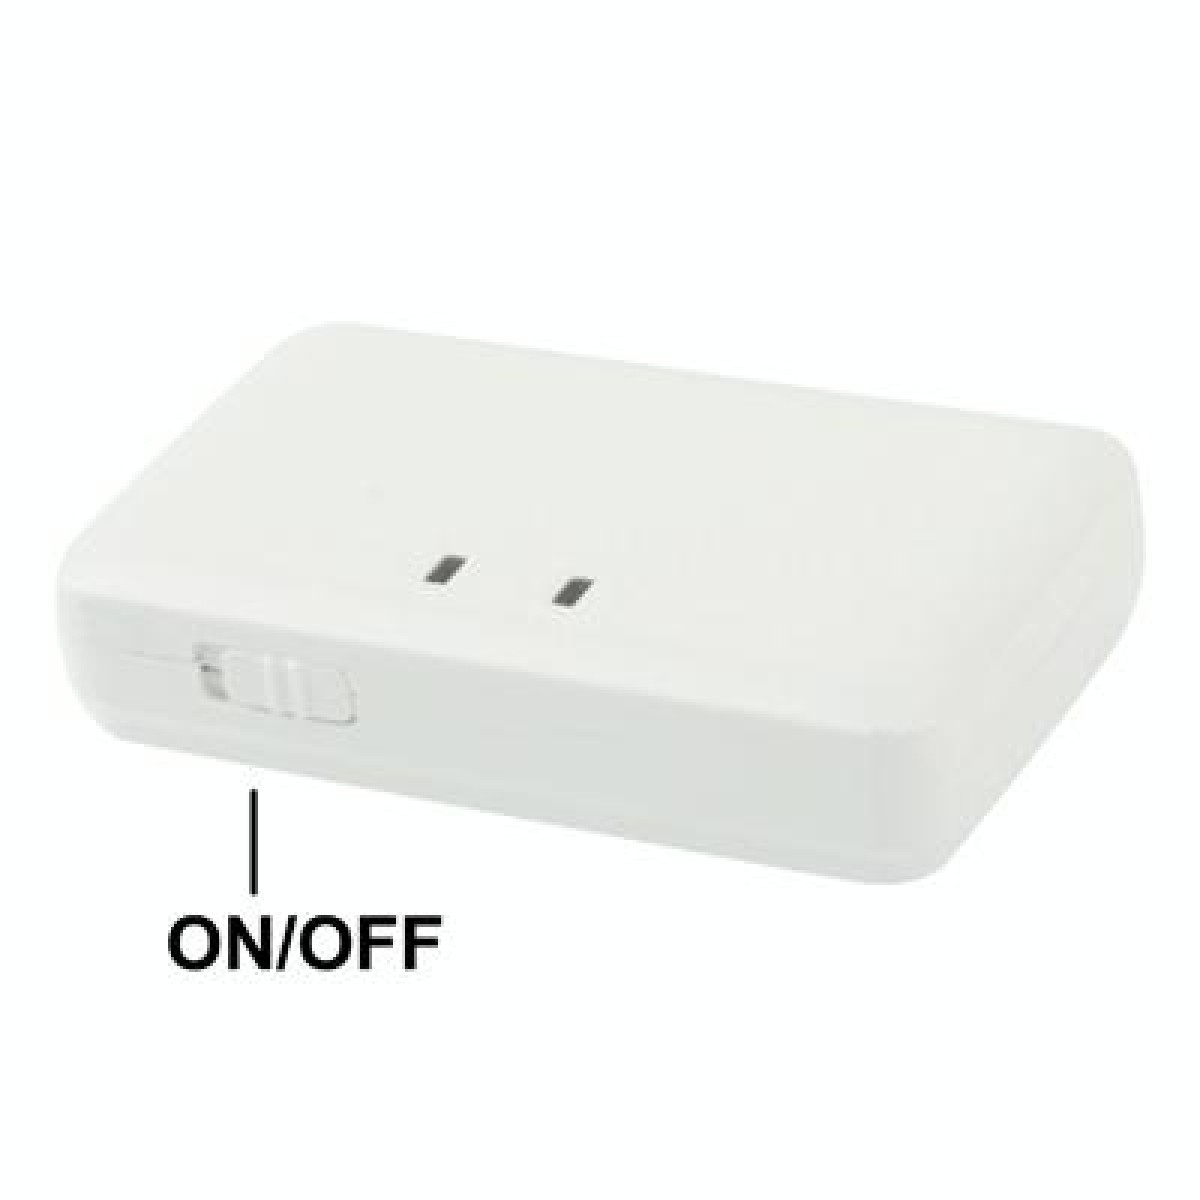 Mini Bluetooth Music Receiver for iPhone 4 & 4S / 3GS / 3G / iPad 3 / iPad 2 / Other Bluetooth Phones & PC, Size: 60 x 36 x 15mm (White)